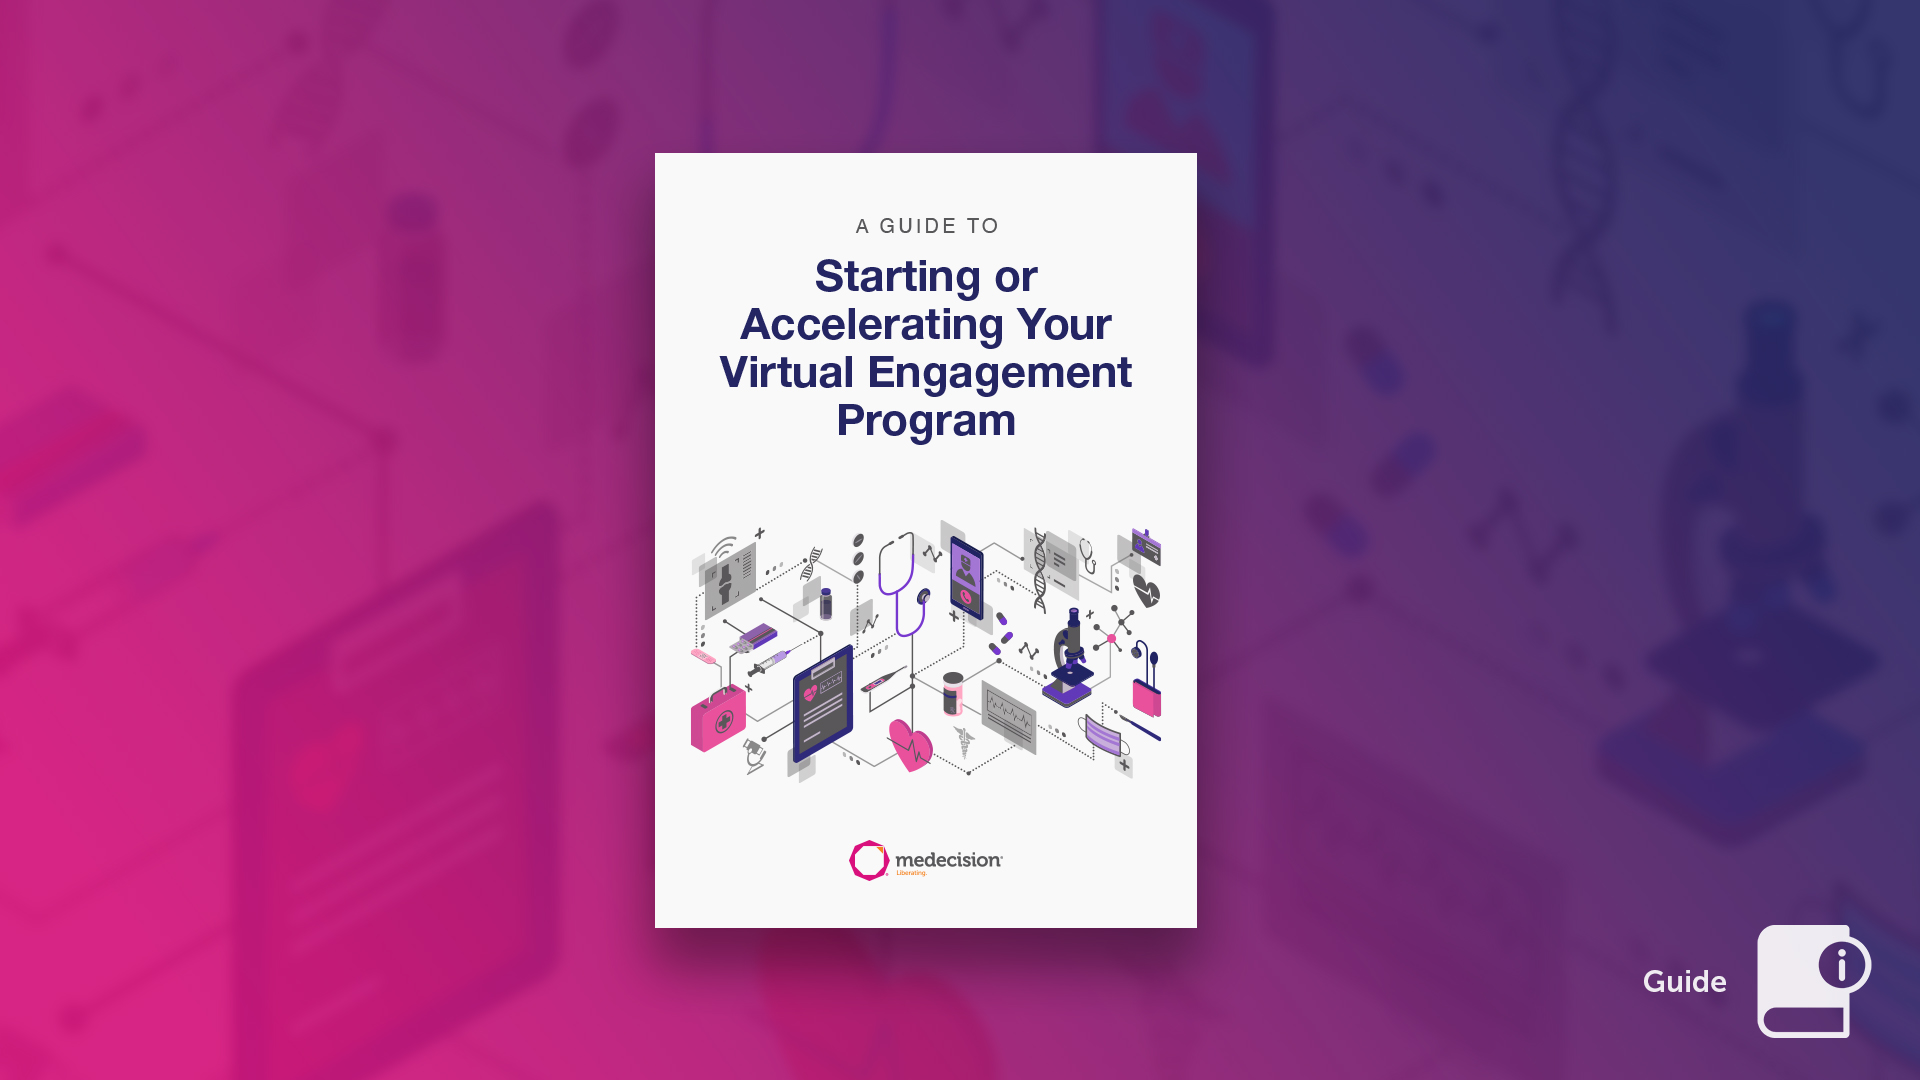 A Guide To Starting or Accelerating Your Virtual Engagement Program